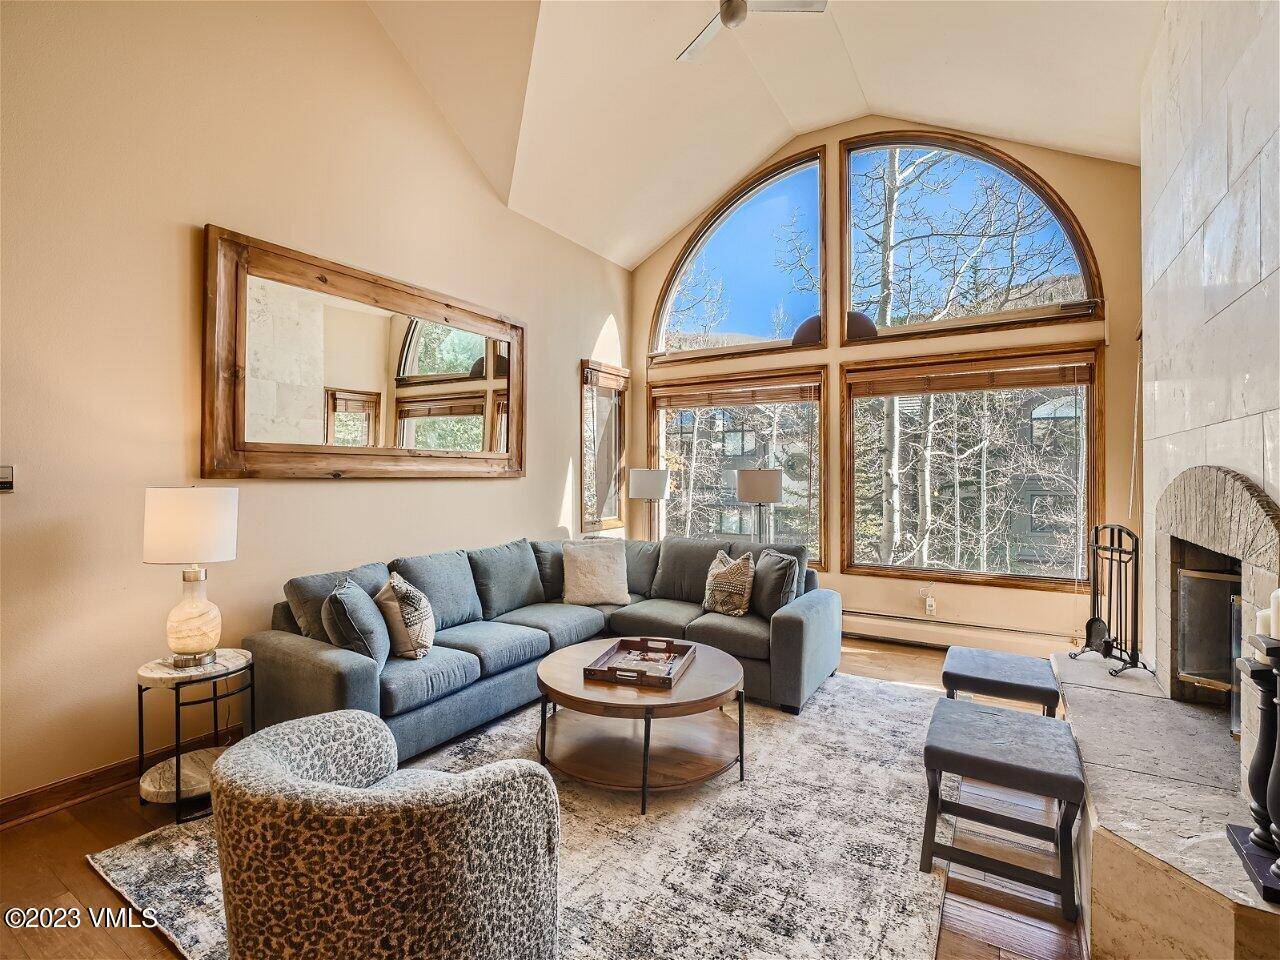 Live the ultimate mountain lifestyle in this stunning 4 bedroom penthouse in the coveted Highlands neighborhood of Beaver Creek !